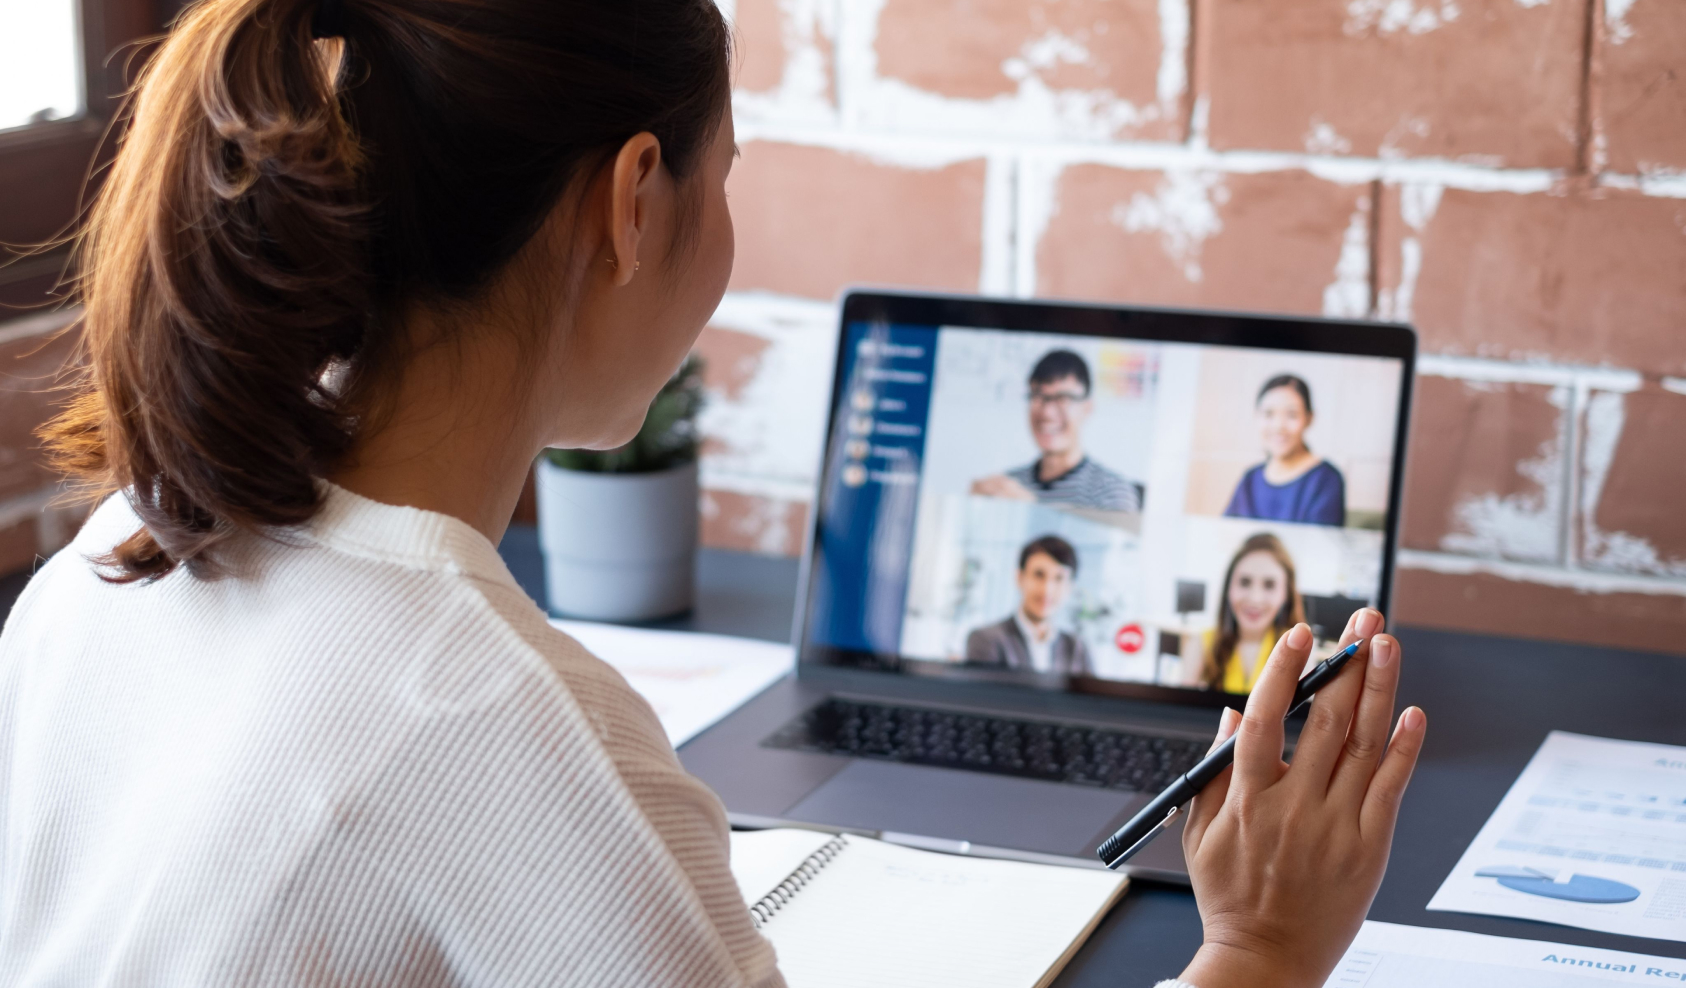 A woman raises her hand while participating in a group video call